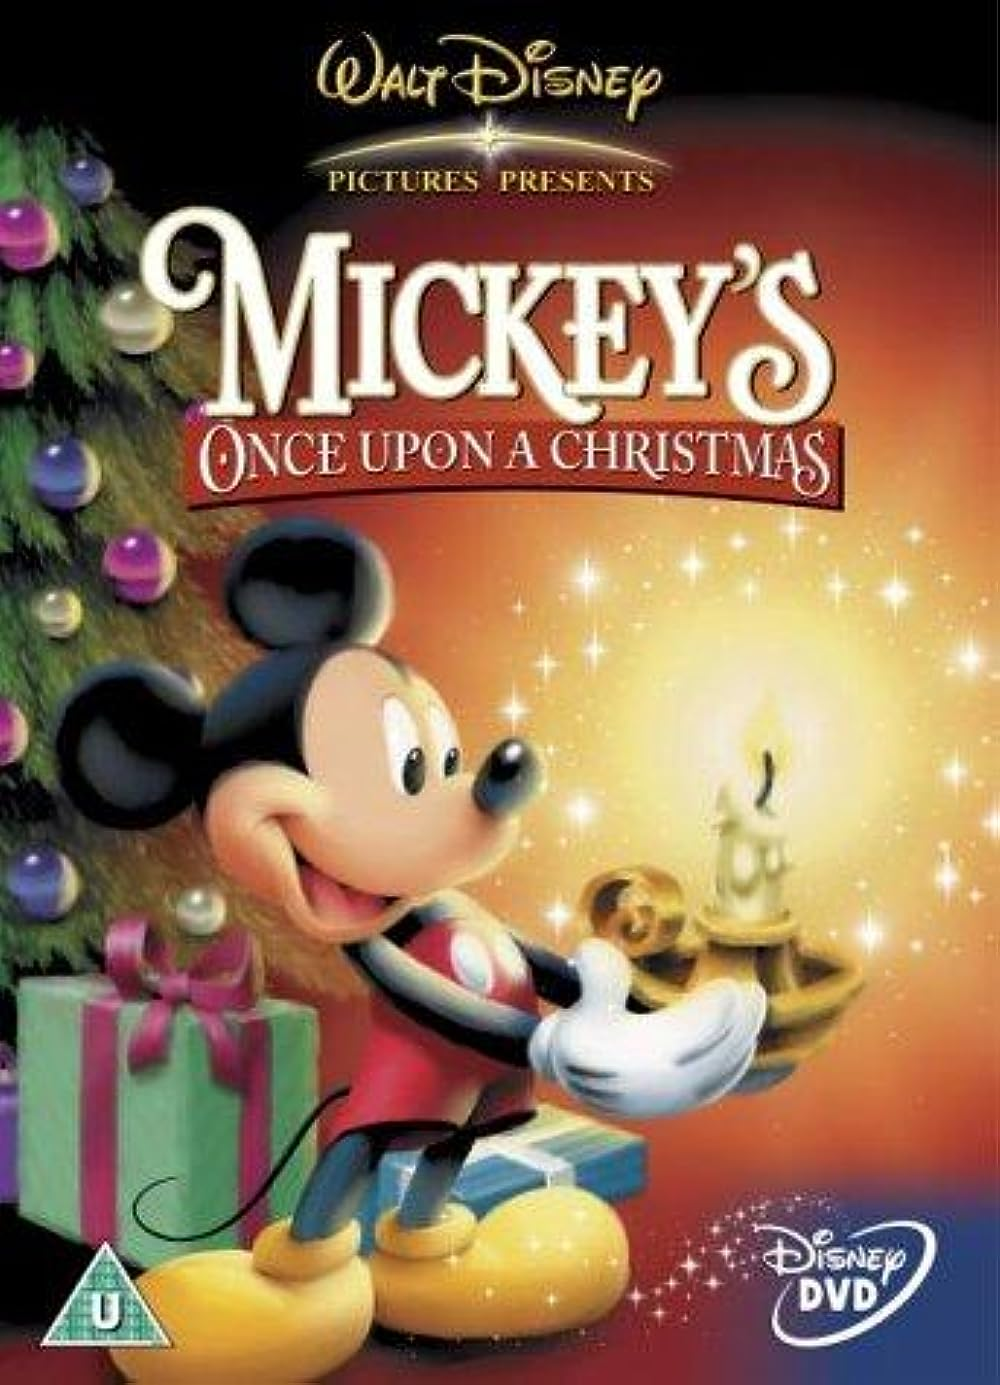 Best Christmas animated movies - Mickey's Once Upon A Christmas